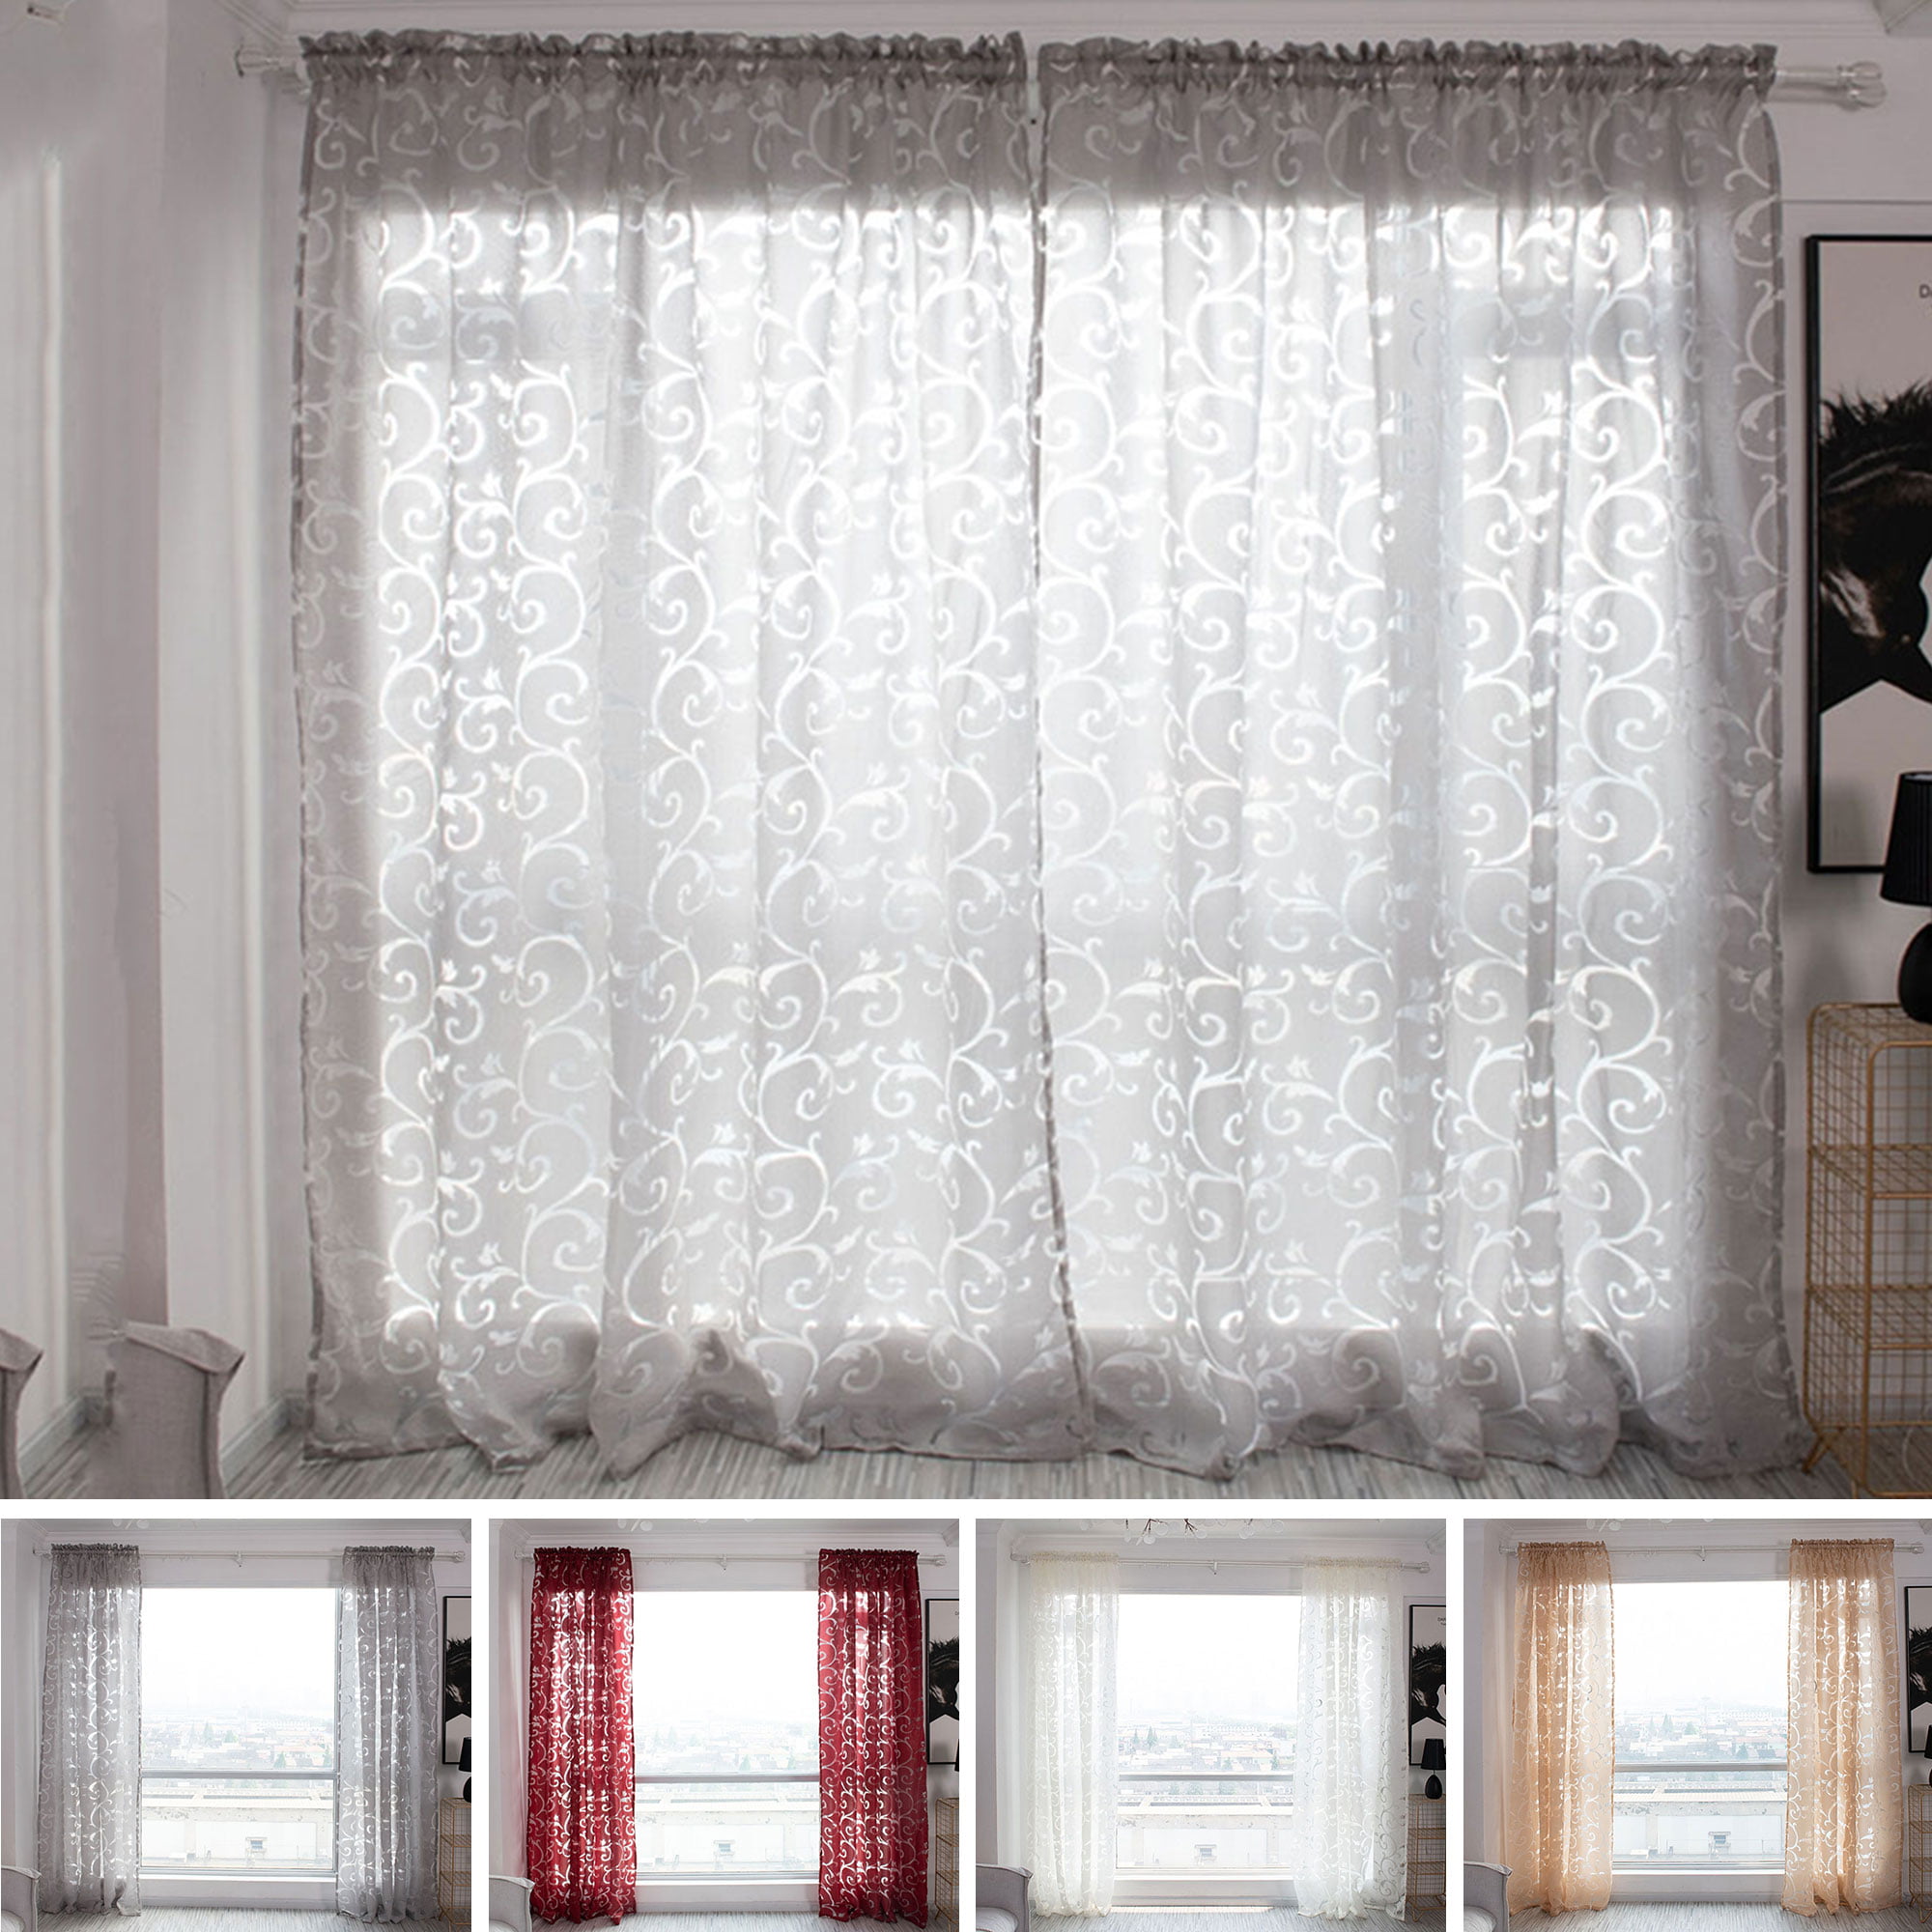 Available Ready Made Voile Net Curtains 6 Size Cafe Panel Kitchen Bathroom 